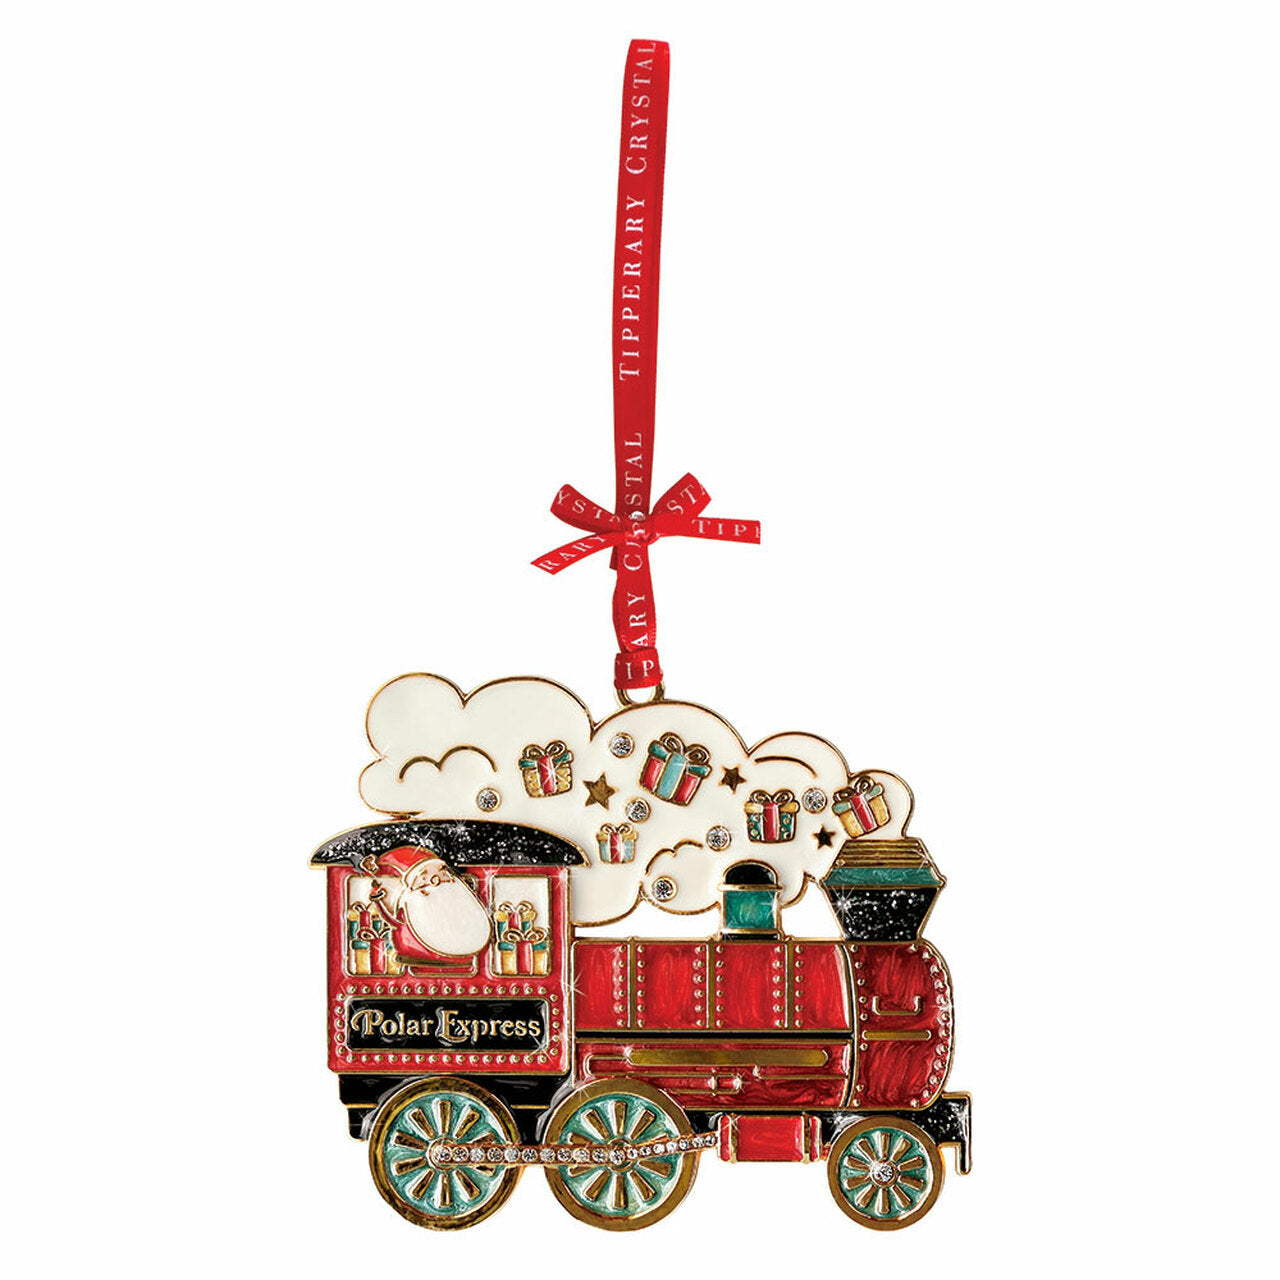 Tipperary Crystal Sparkle Polar Express Decoration  We just Love Christmas! The festive season, the giving of gifts, creating memories and being together with family and loved ones. Have lots of fun with our lovingly designed and created Christmas decorations, each one has a magic sparkle of elf dust.